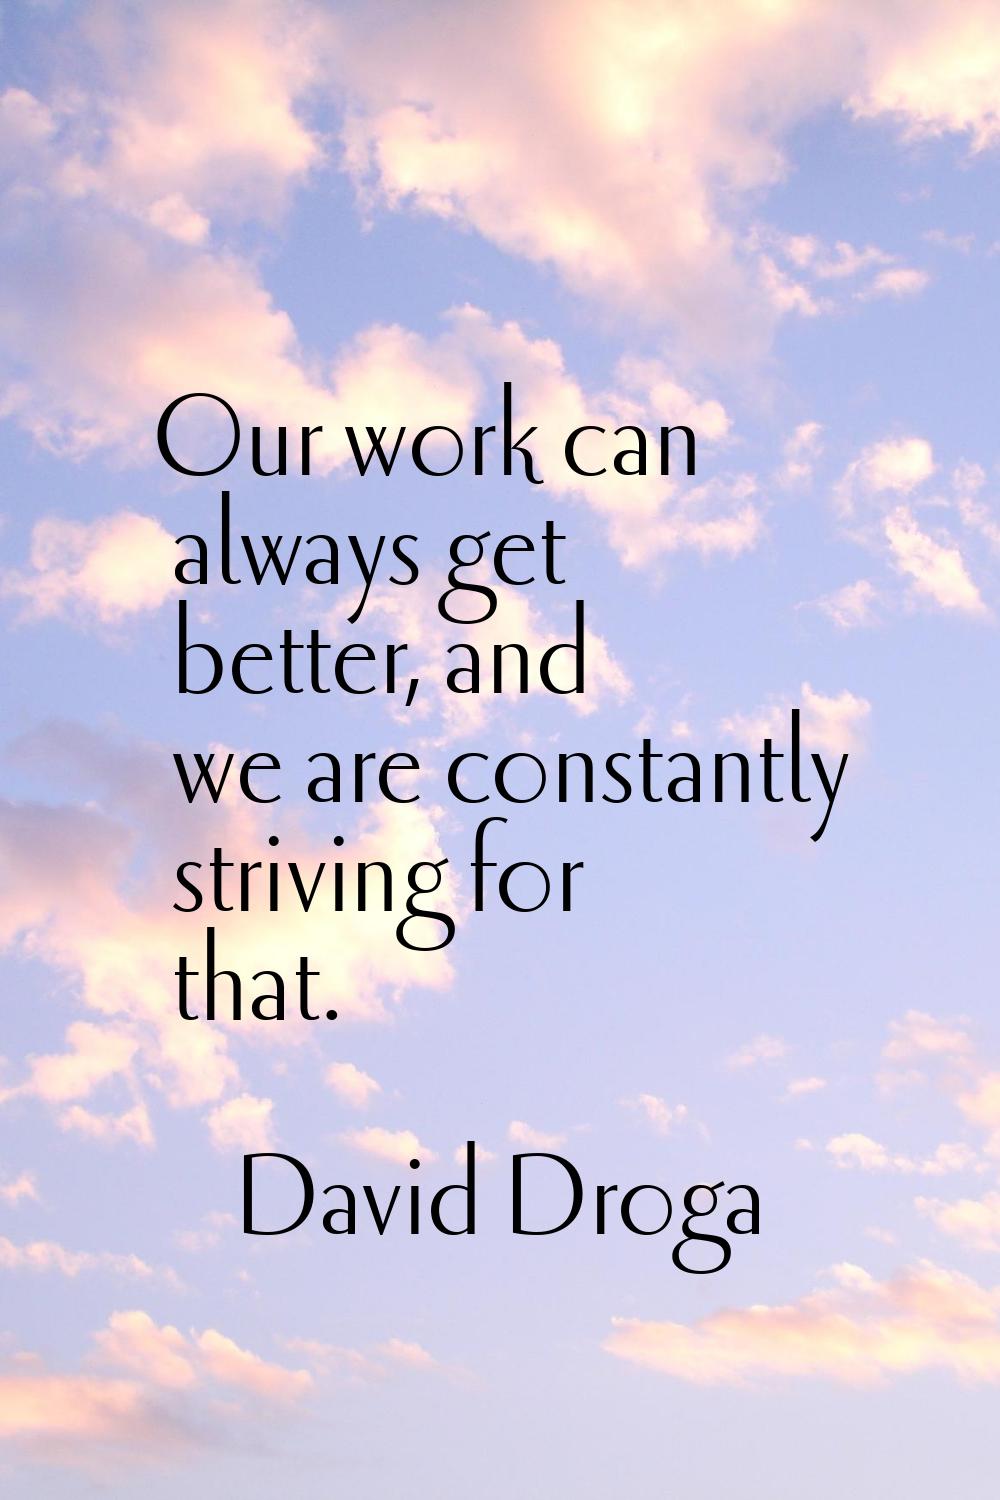 Our work can always get better, and we are constantly striving for that.